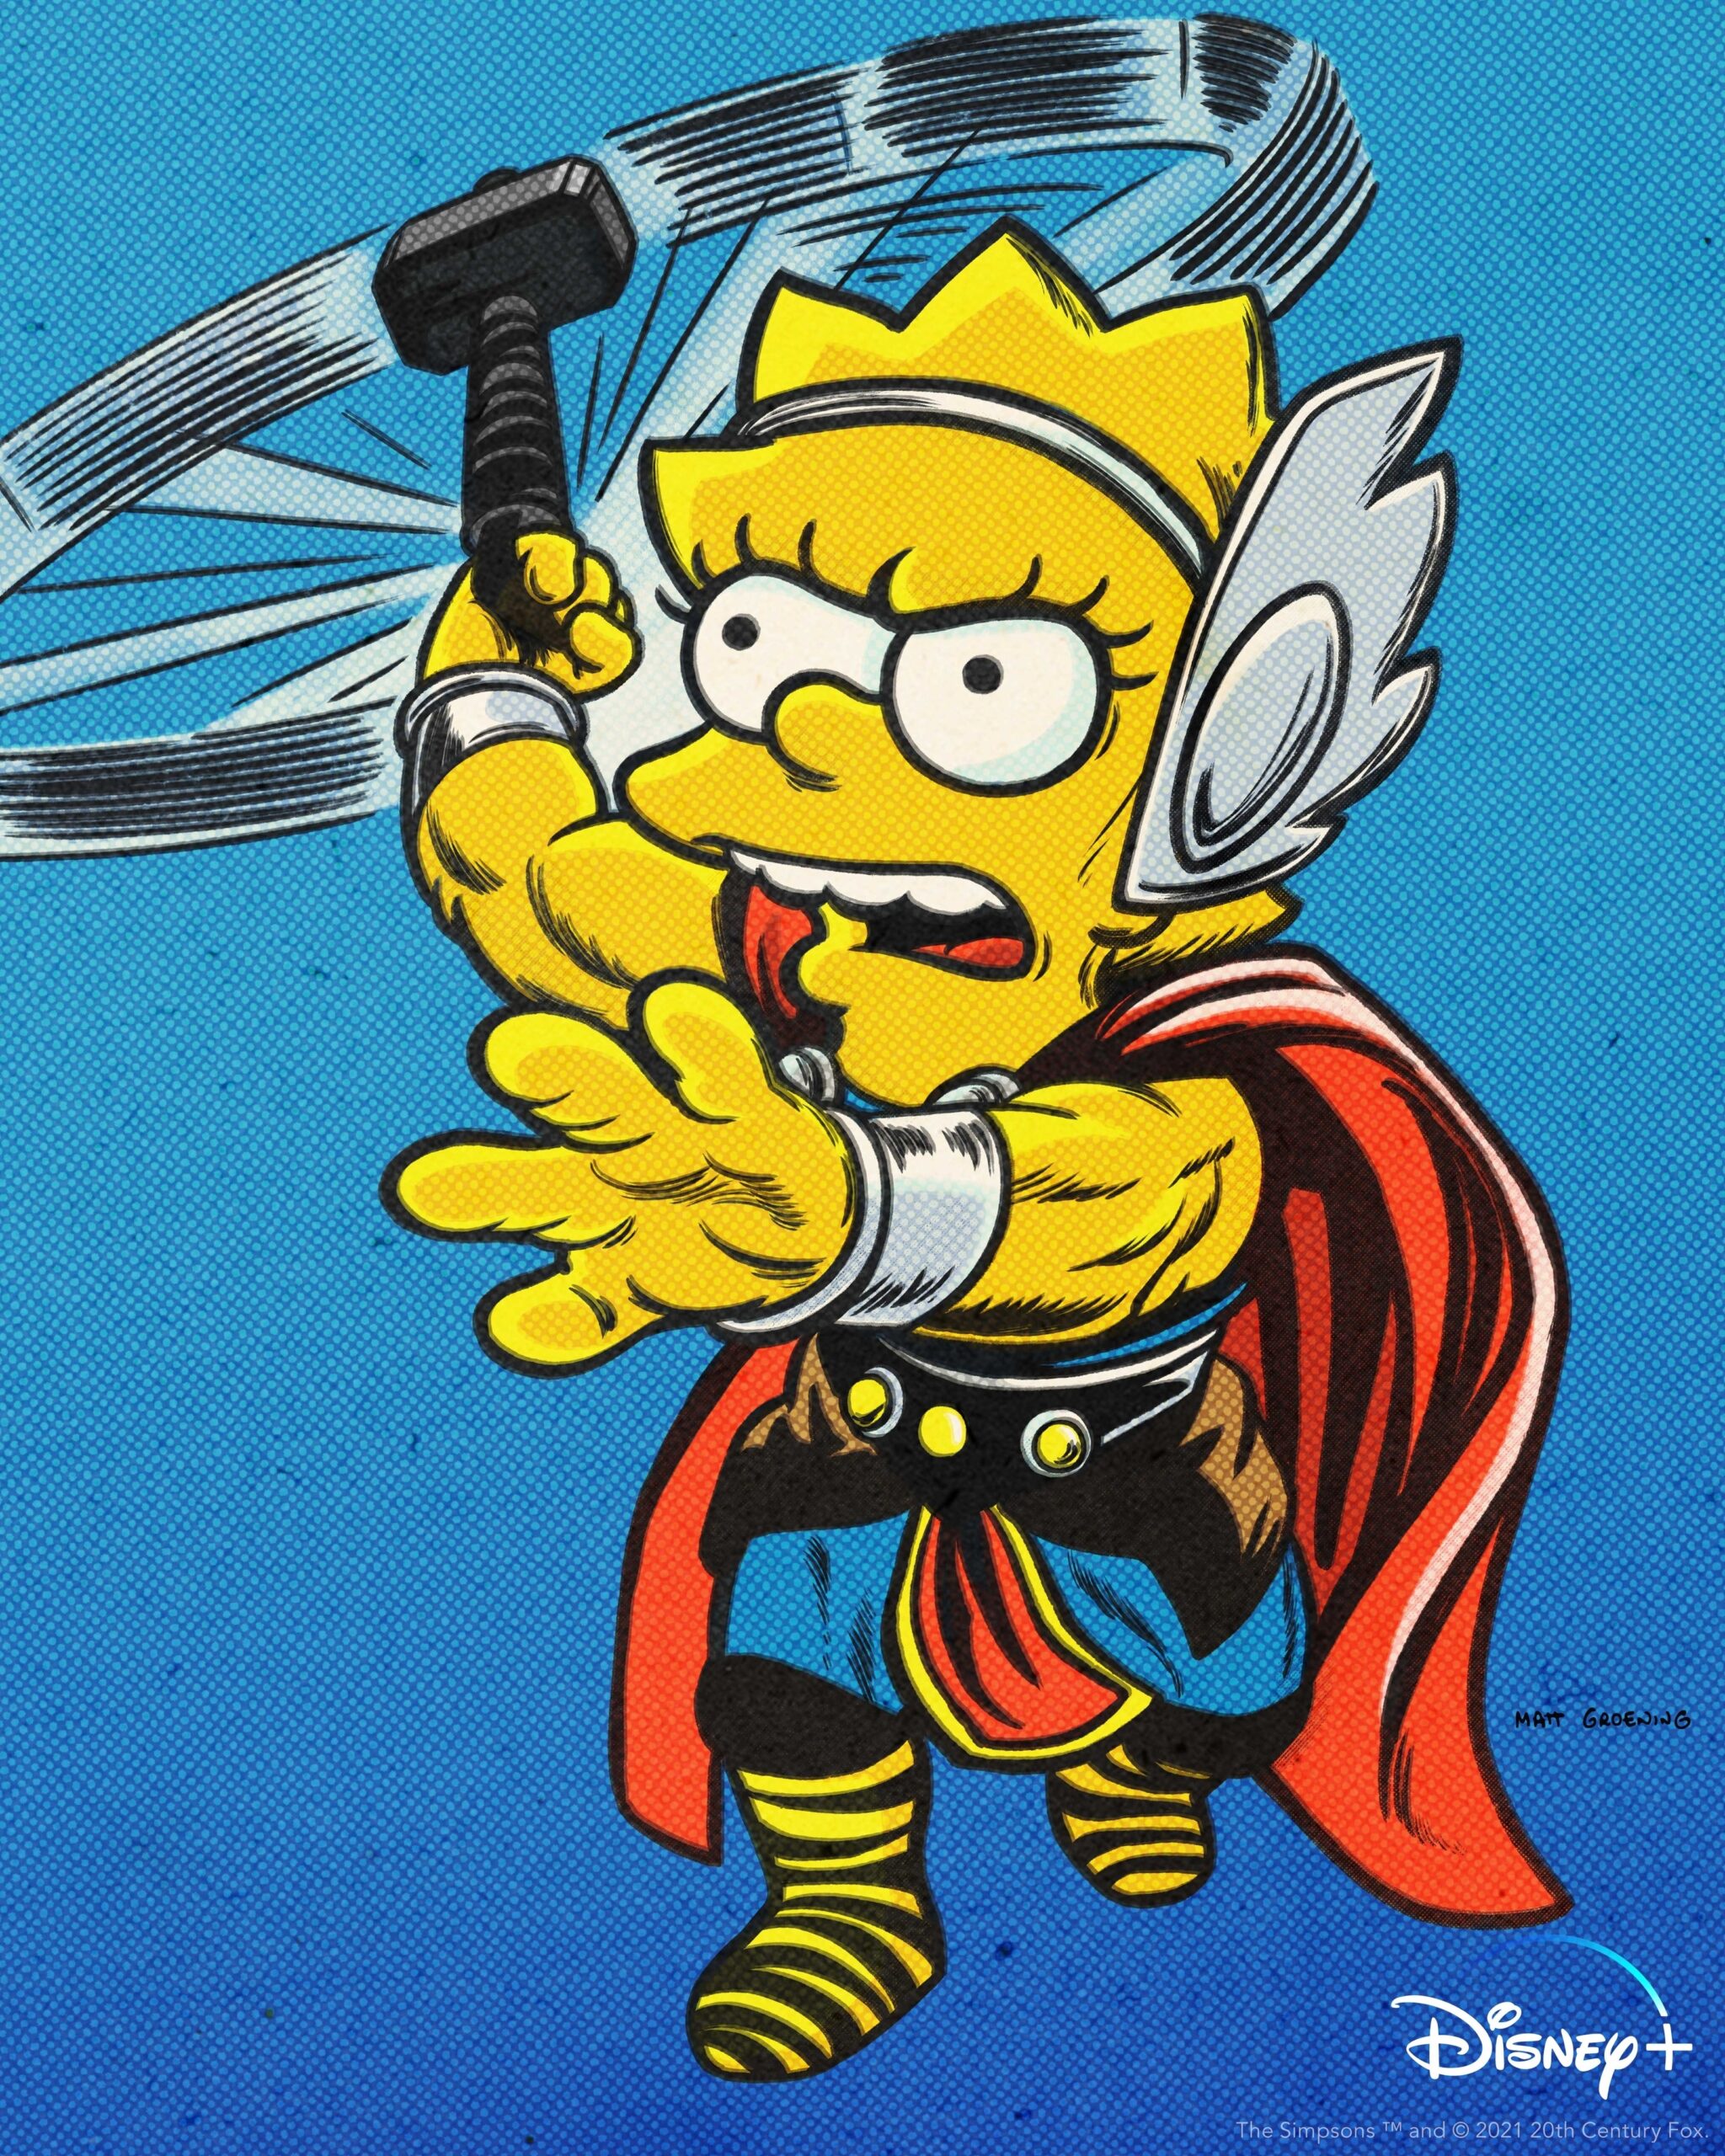 the simpsons: the good, the bart, and the loki